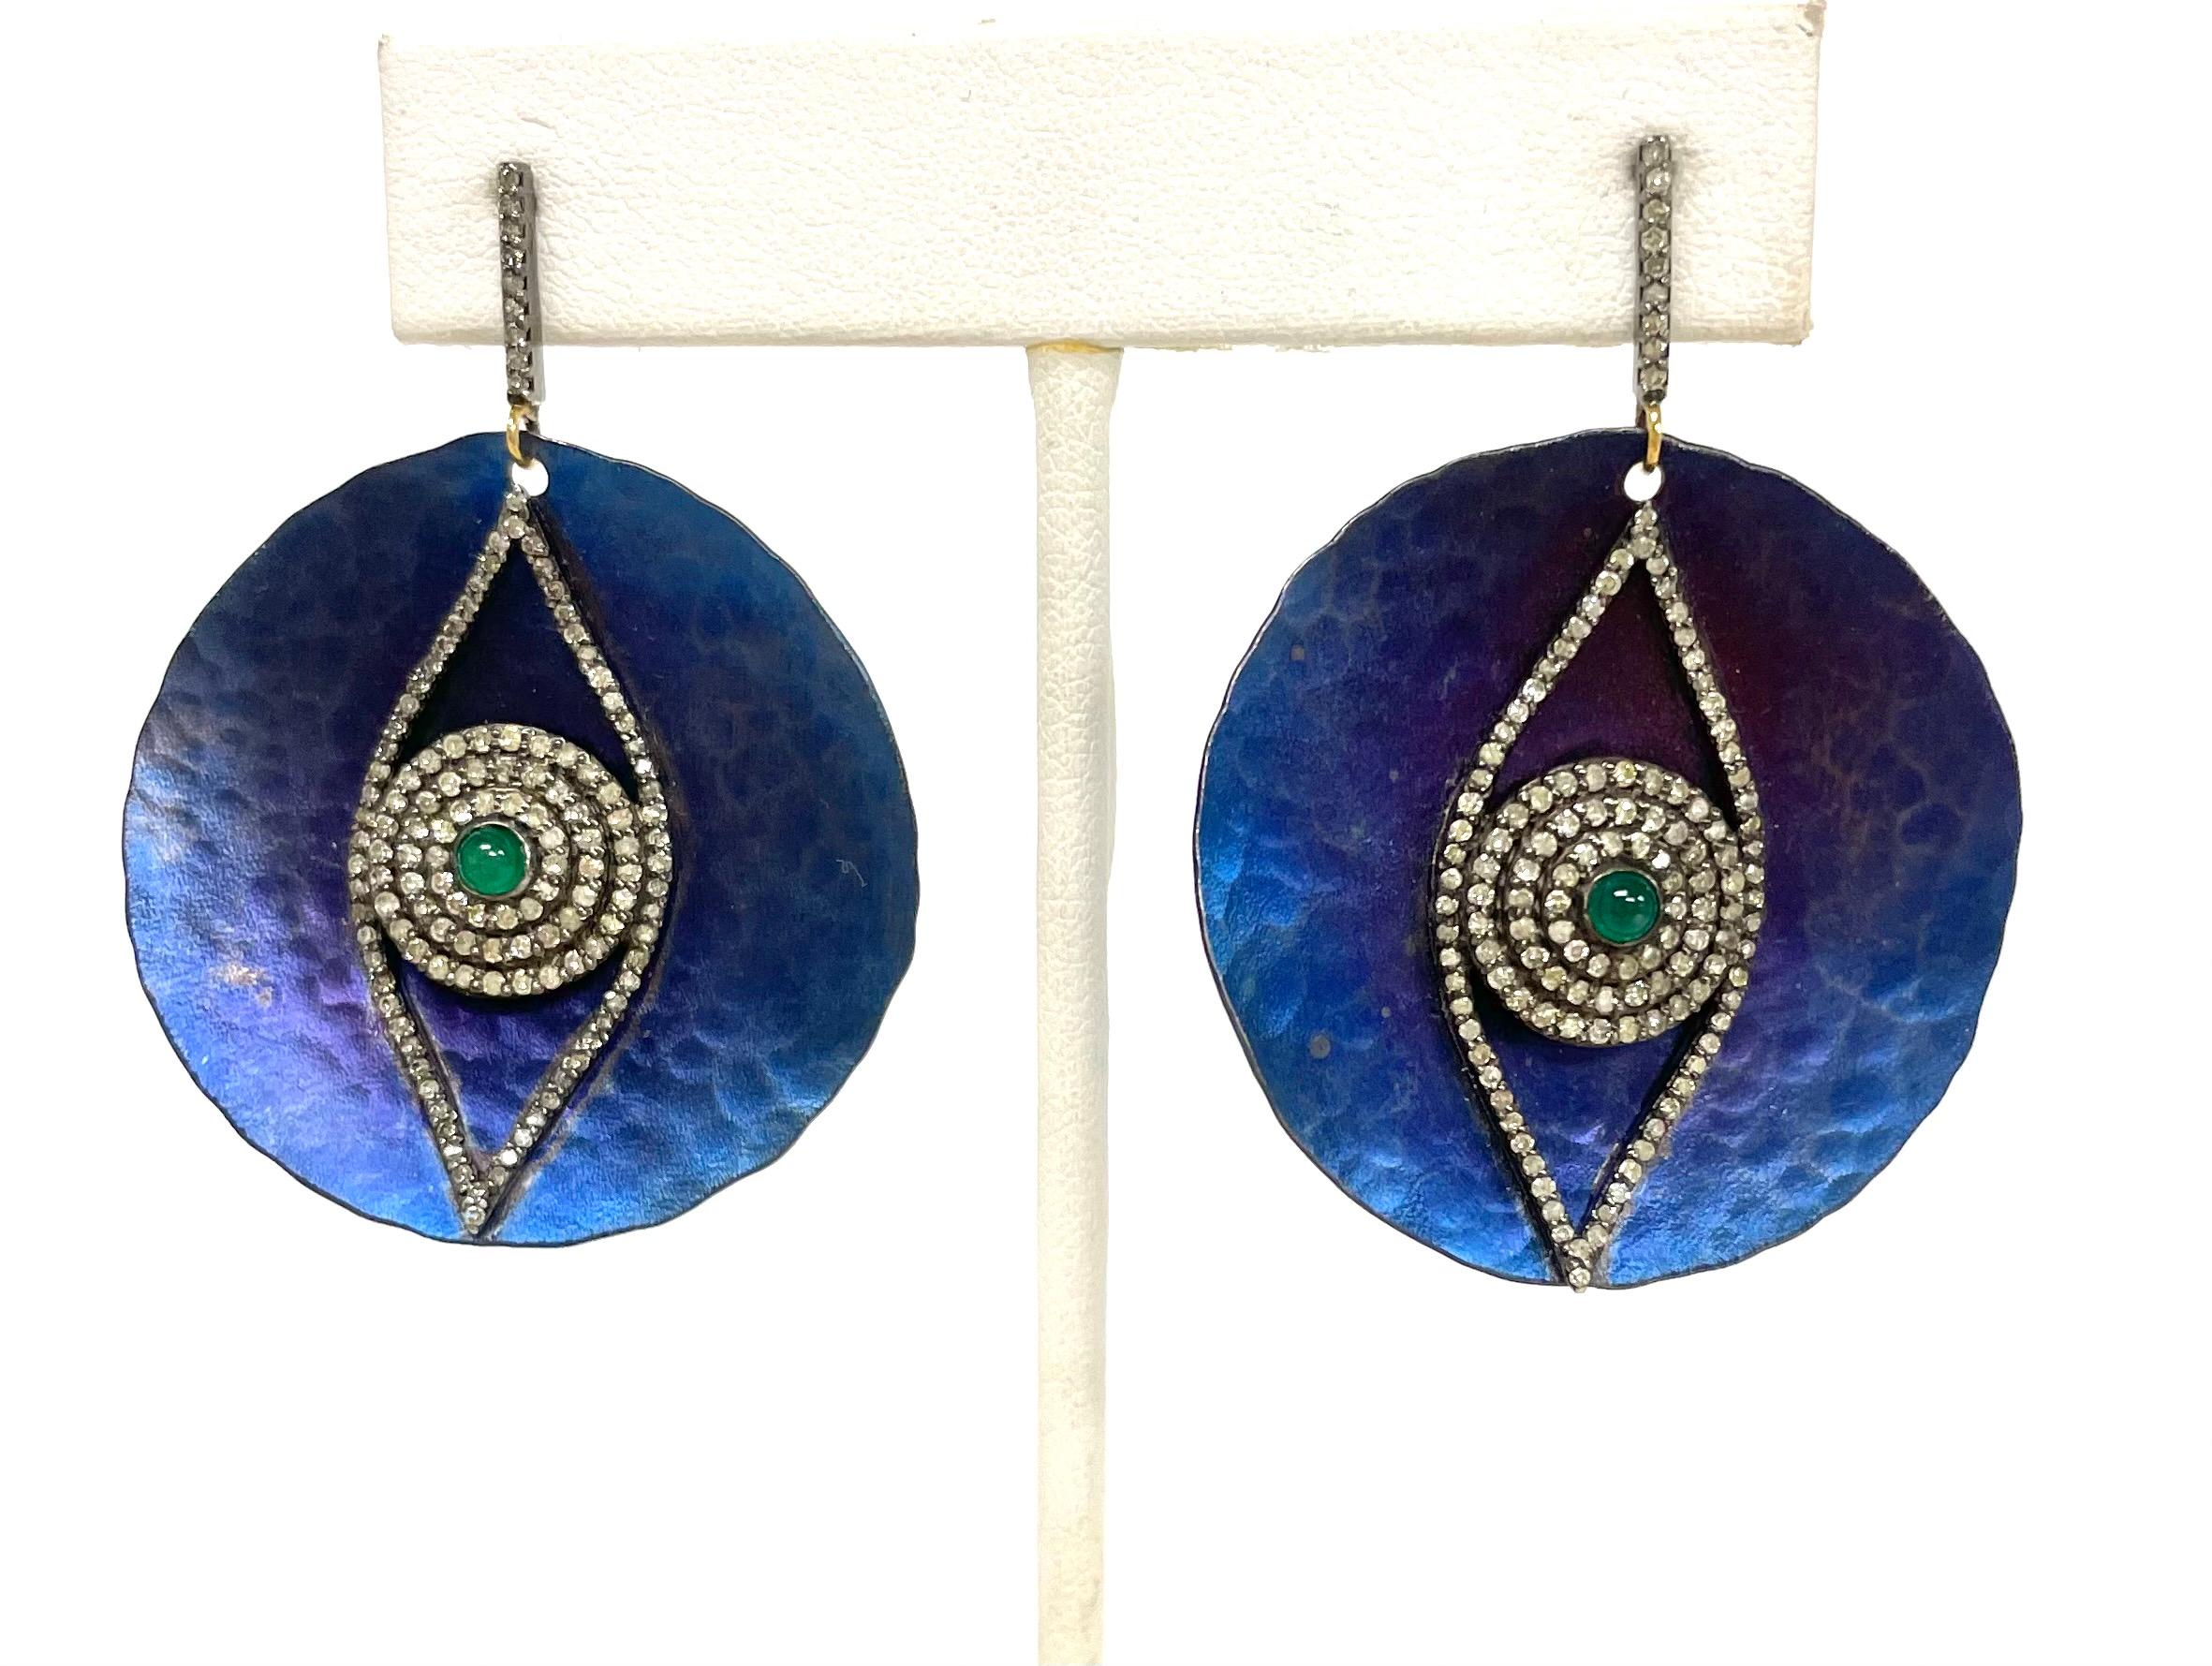  Cobalt Blue Titanium with Emeralds and Diamonds Earrings  For Sale 1